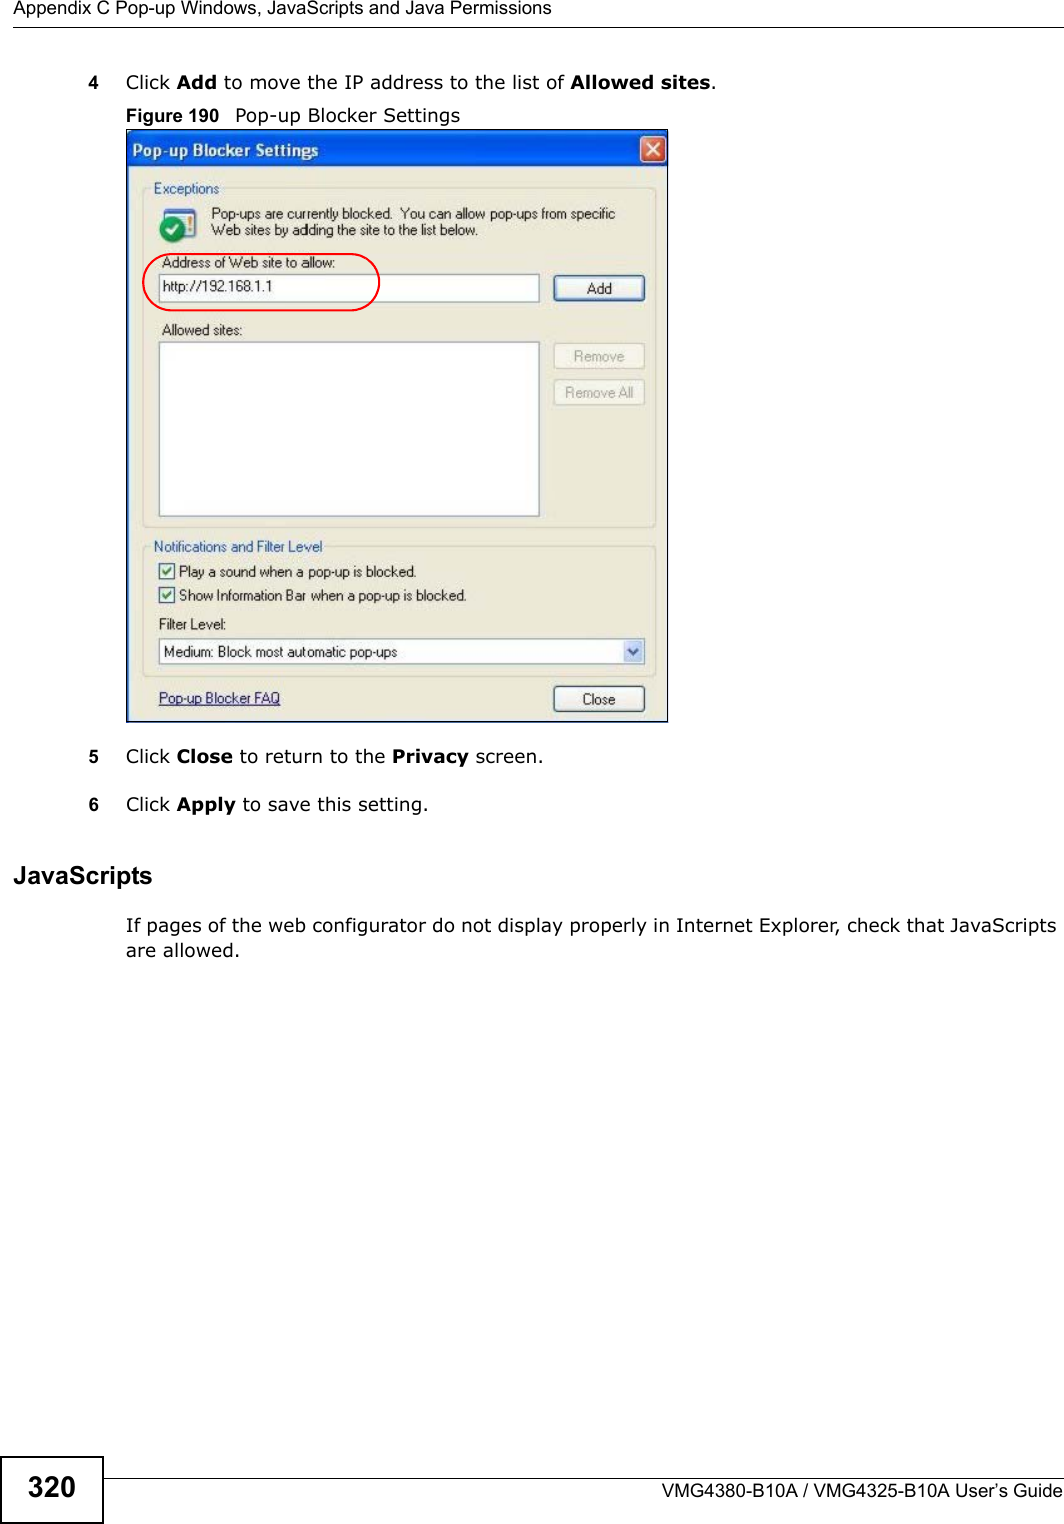 Appendix C Pop-up Windows, JavaScripts and Java PermissionsVMG4380-B10A / VMG4325-B10A User’s Guide3204Click Add to move the IP address to the list of Allowed sites.Figure 190   Pop-up Blocker Settings5Click Close to return to the Privacy screen. 6Click Apply to save this setting. JavaScriptsIf pages of the web configurator do not display properly in Internet Explorer, check that JavaScripts are allowed. 